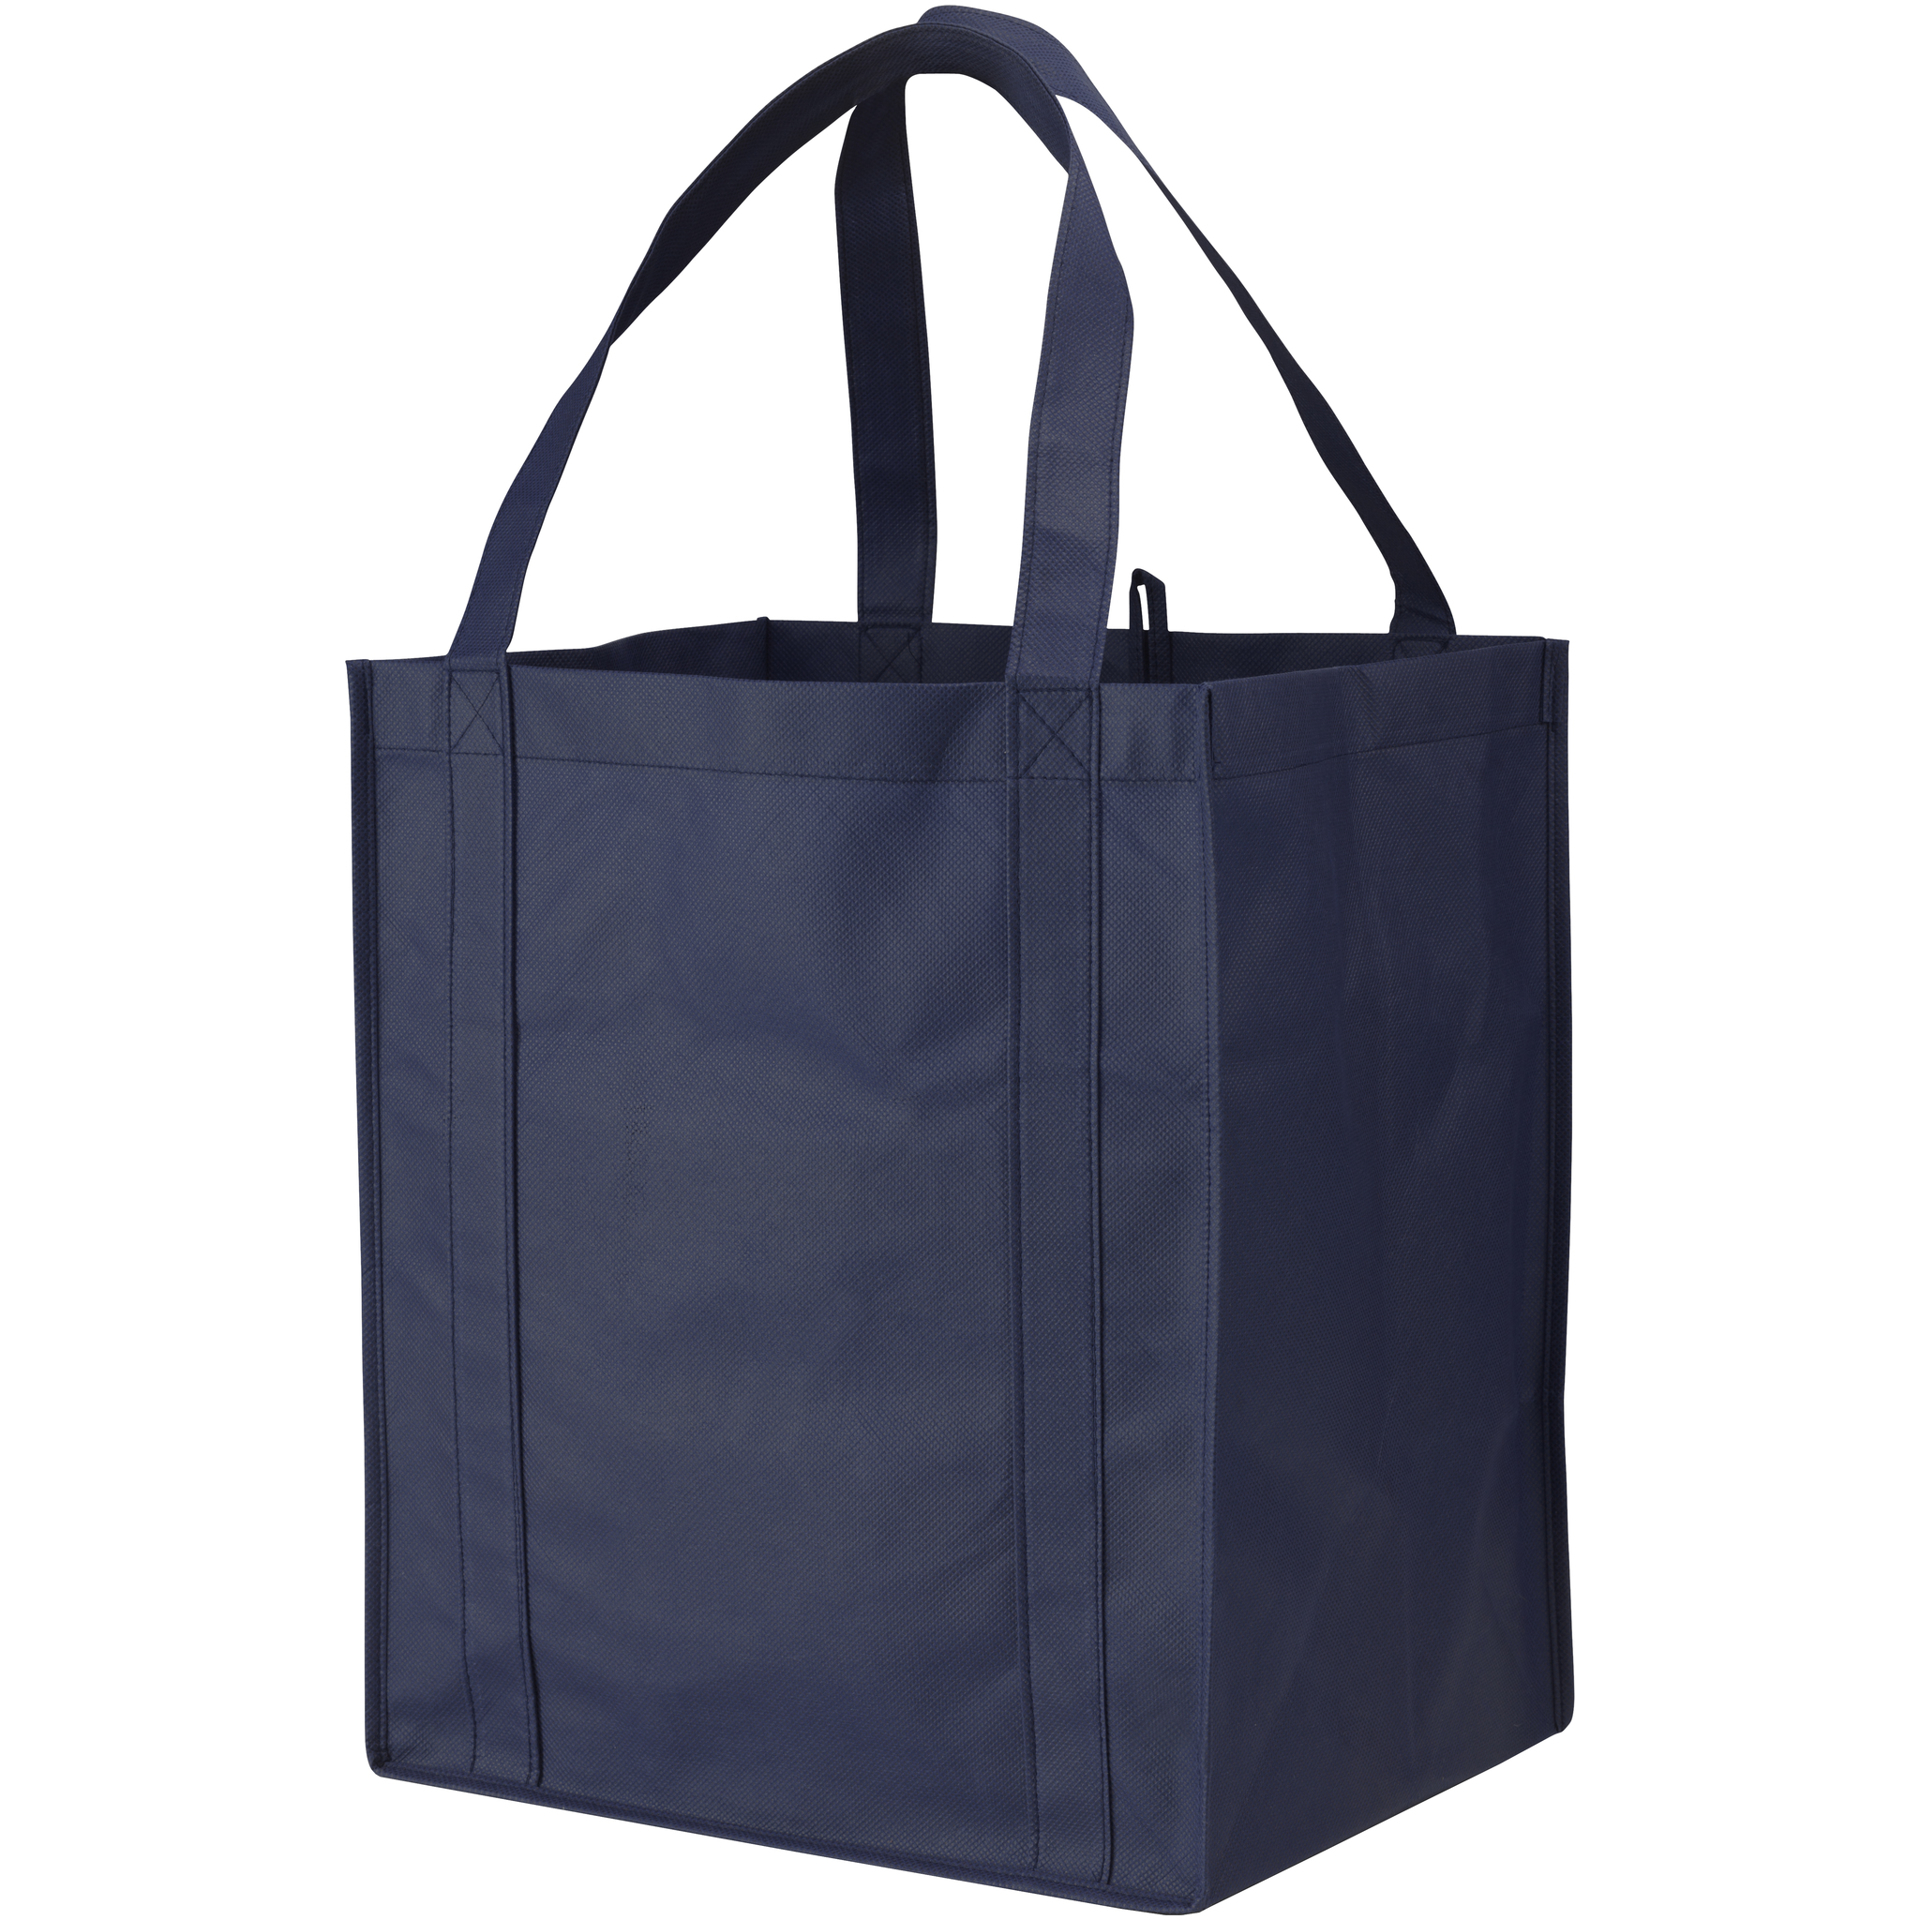 Grocery shopper bag in navy, made from polypropylene non woven material